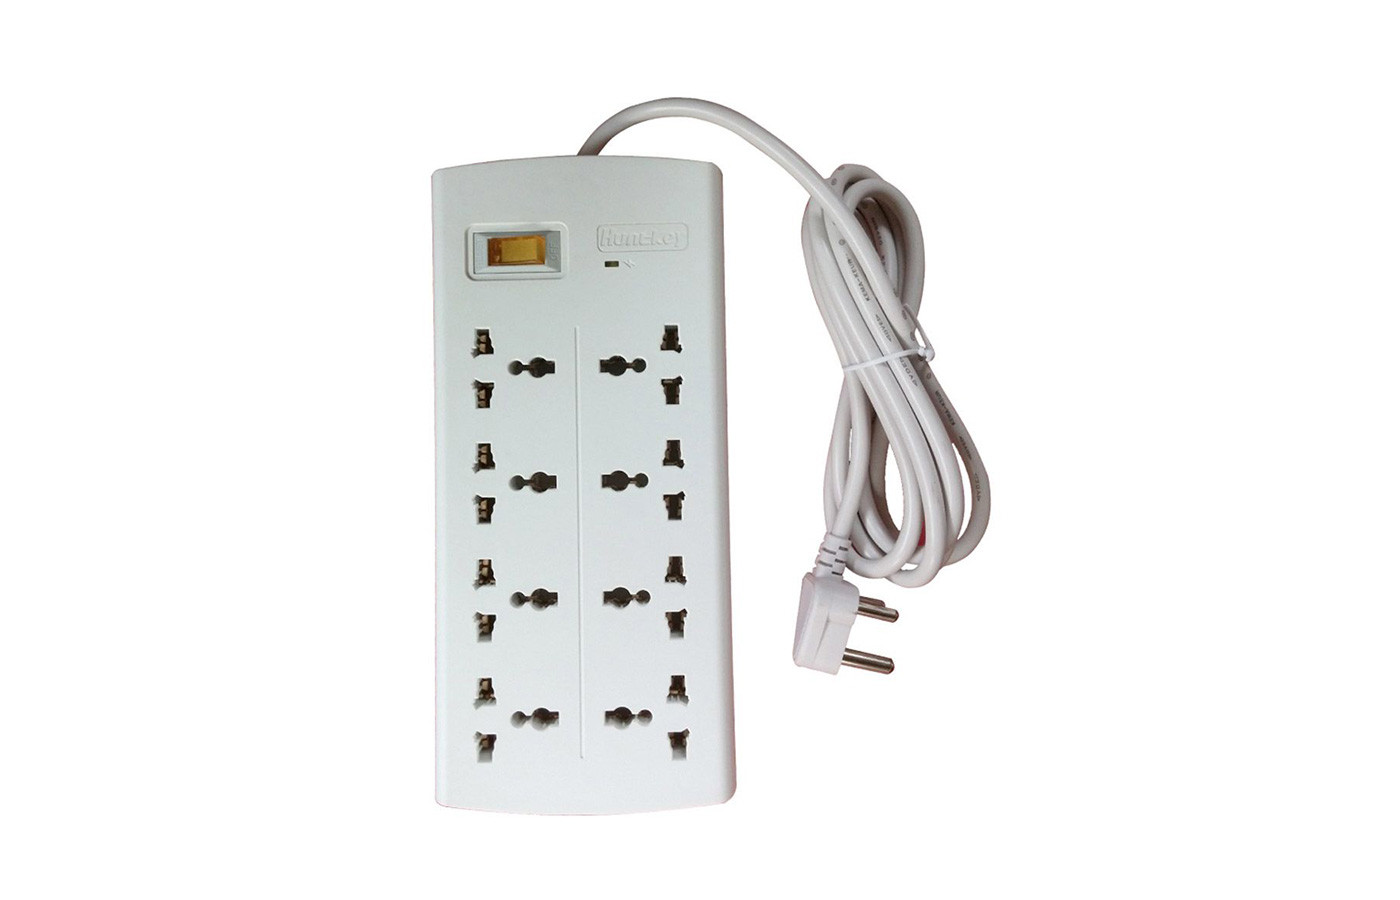 Huntkey SZM304 3 Socket Surge Protector Extension Cable